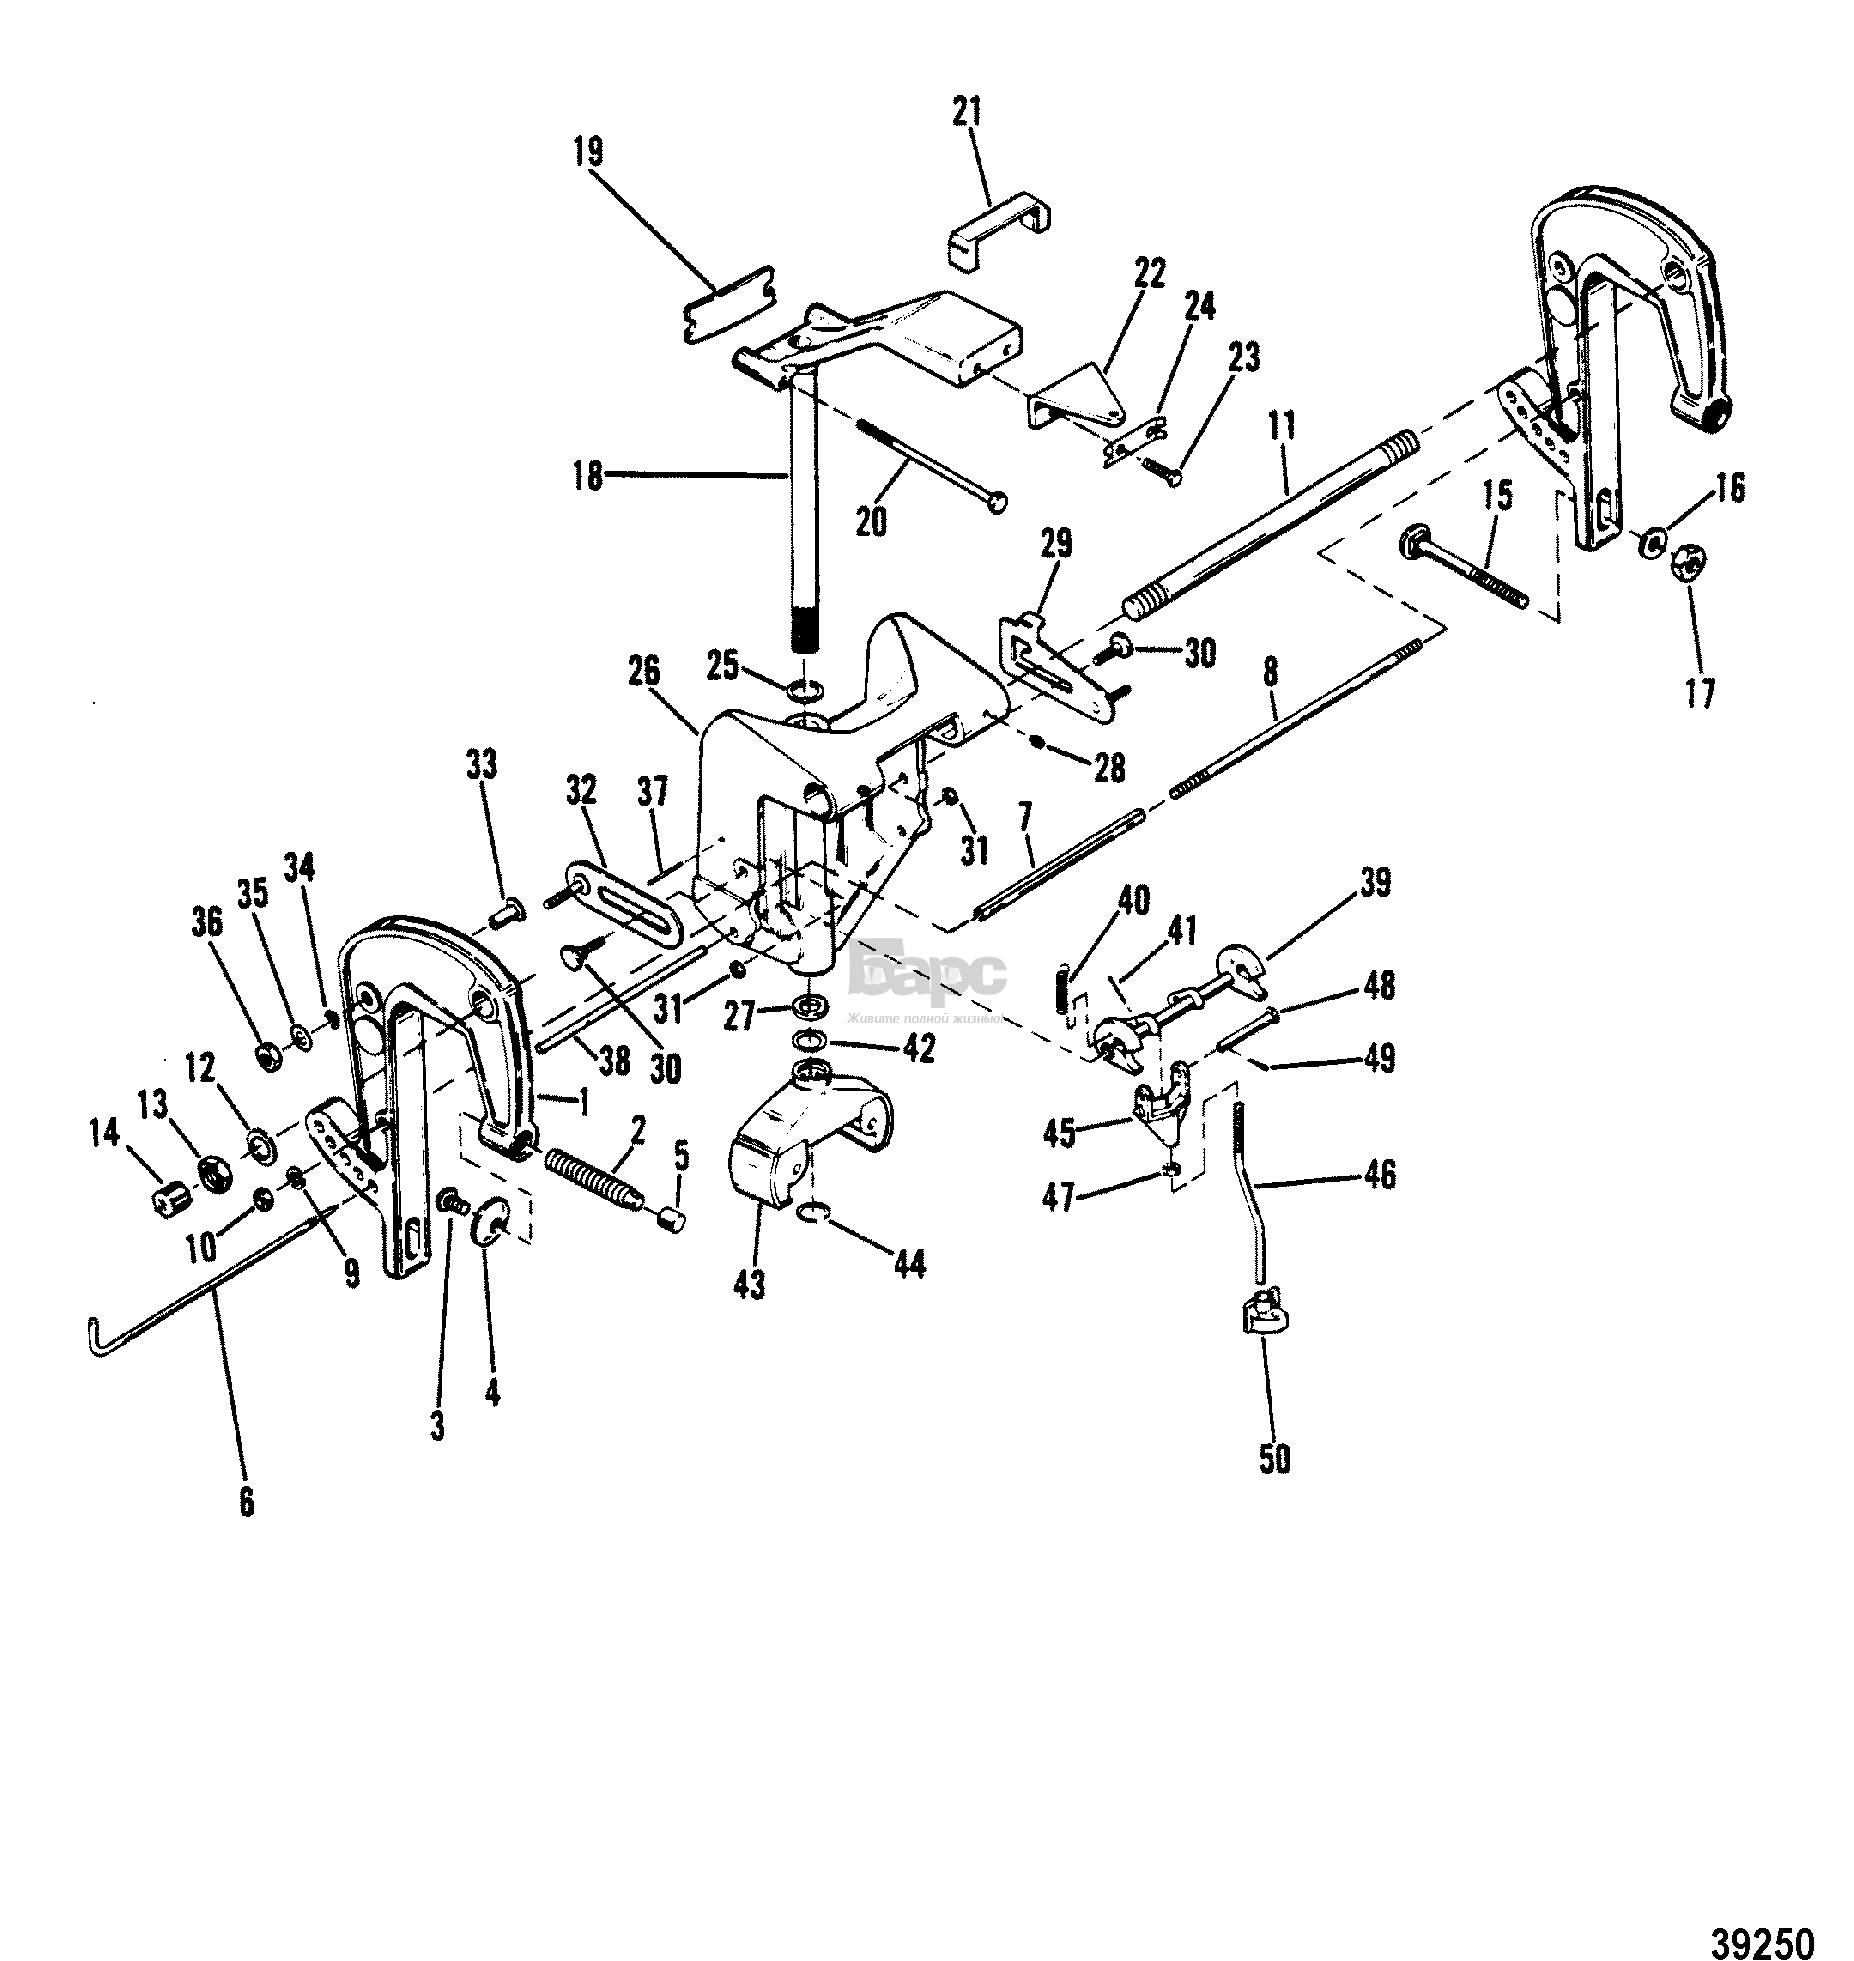 CLAMP AND SWIVEL BRACKET ASSEMBLY